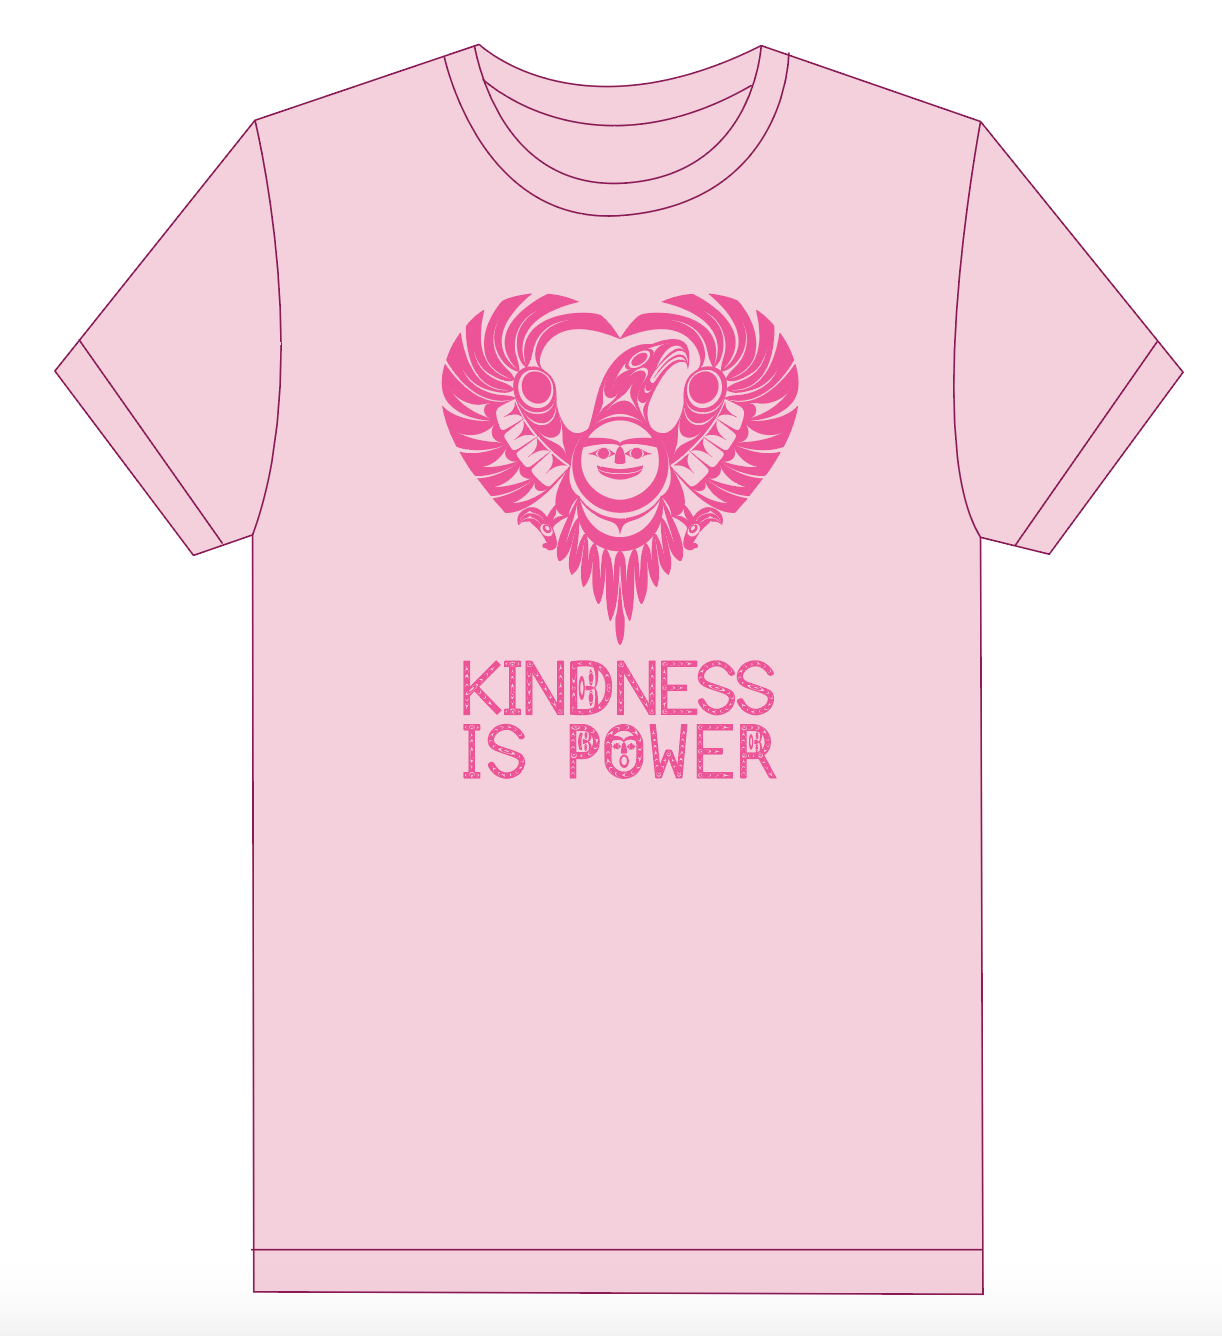 2022 Kindness is Power - Pink Shirt by Francis Horne Sr. - Youth Sizes-2